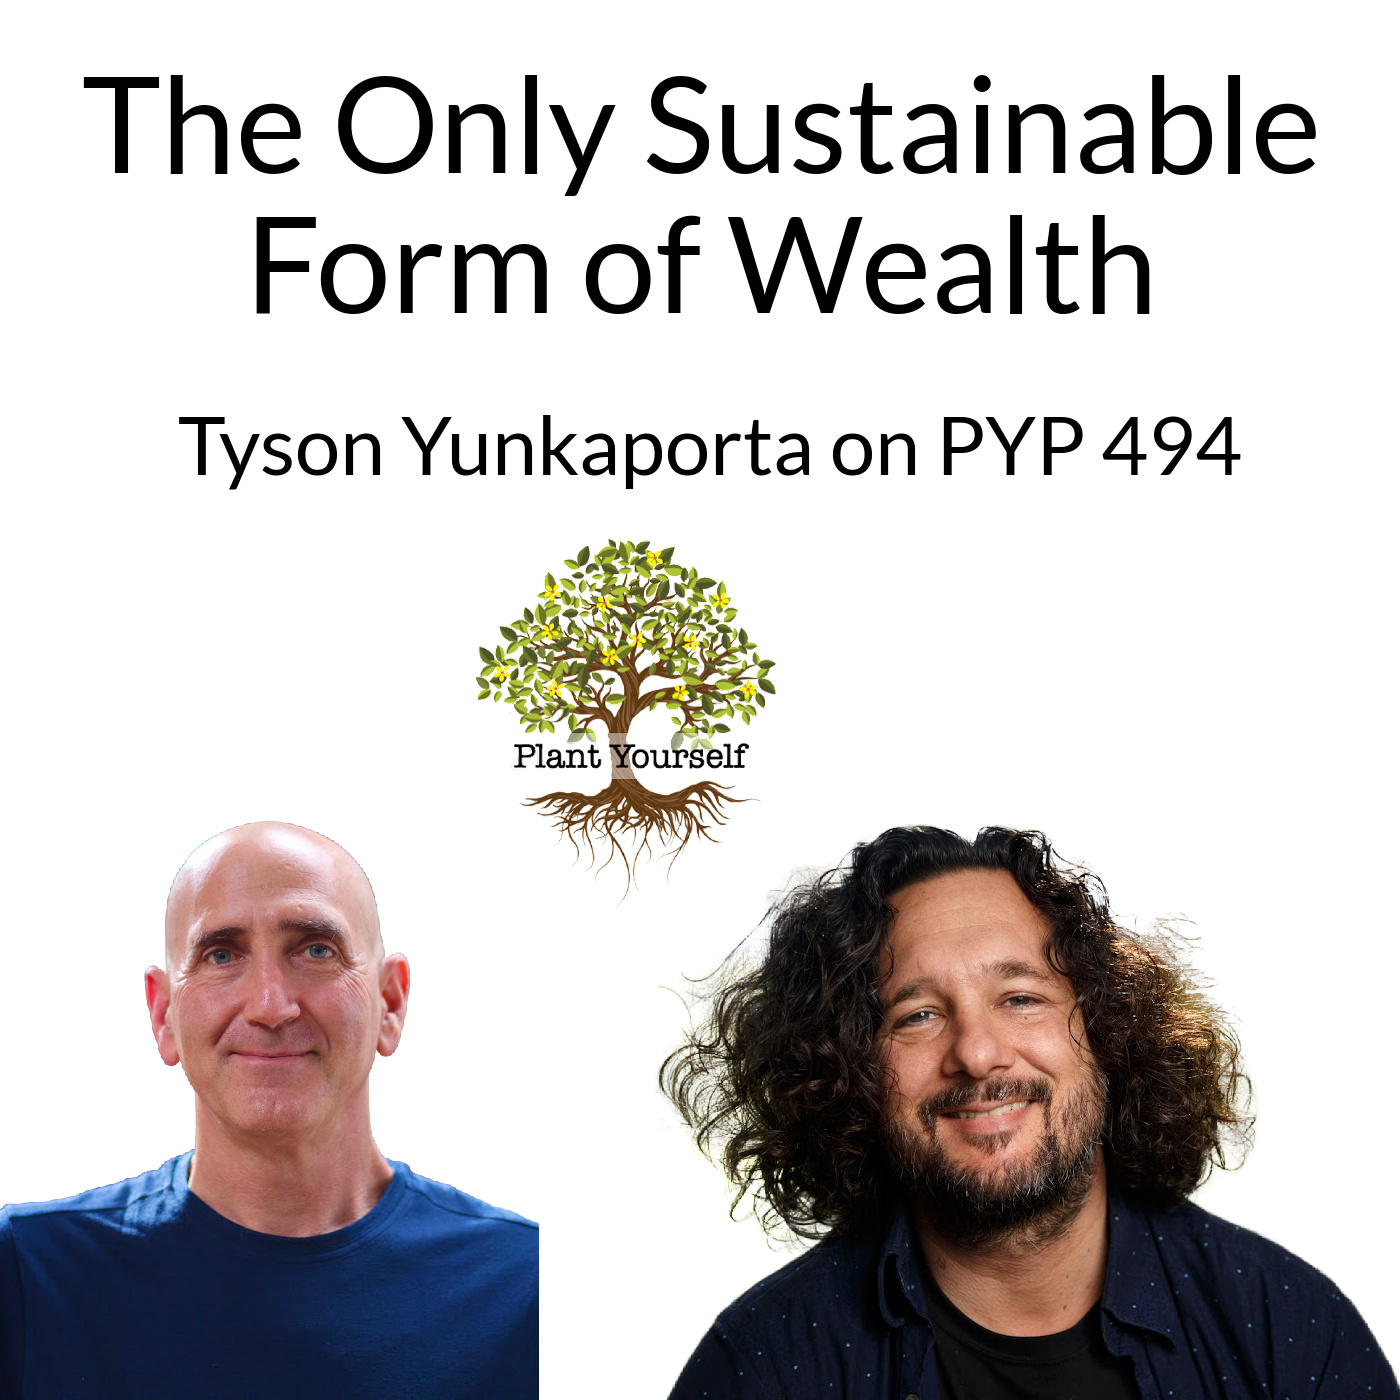 The Only Sustainable Form of Wealth: Tyson Yunkaporta on PYP 494